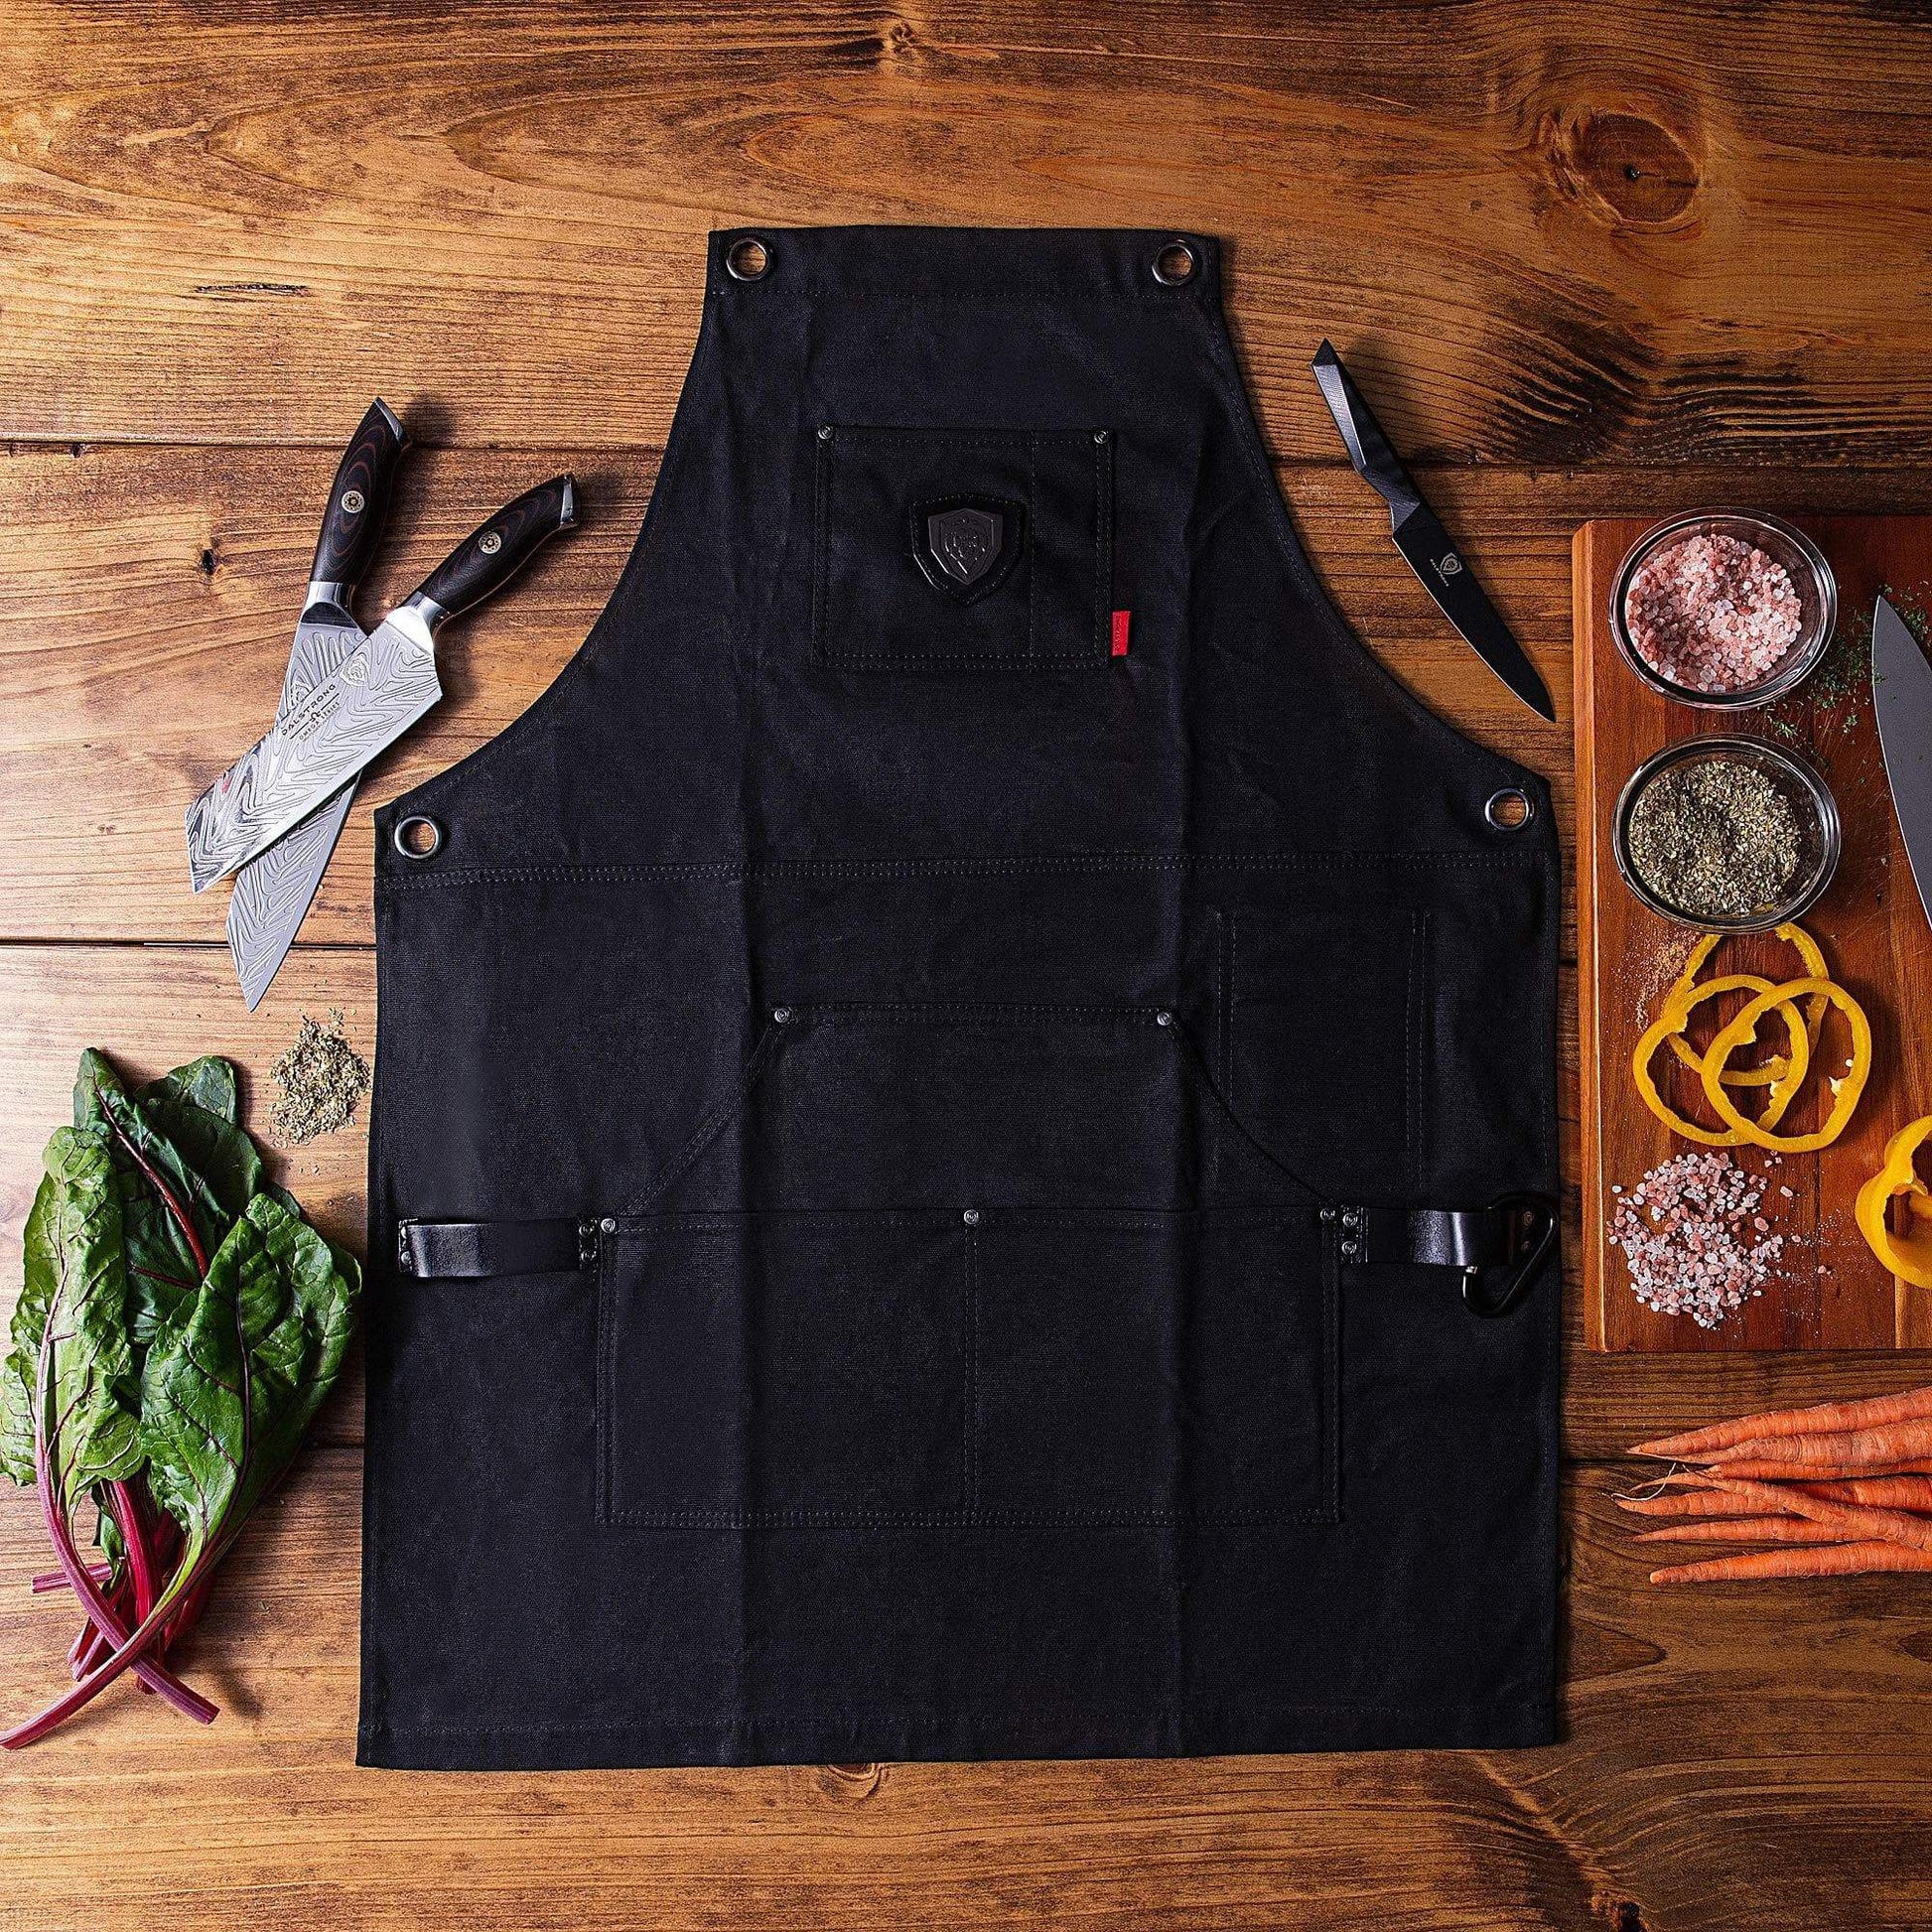 Latest dalstrong professional chefs kitchen apron sous team 6 heavy duty waxed canvas 5 storage pockets towel tong loop liquid repellent coating genuine leather accents adjustable straps